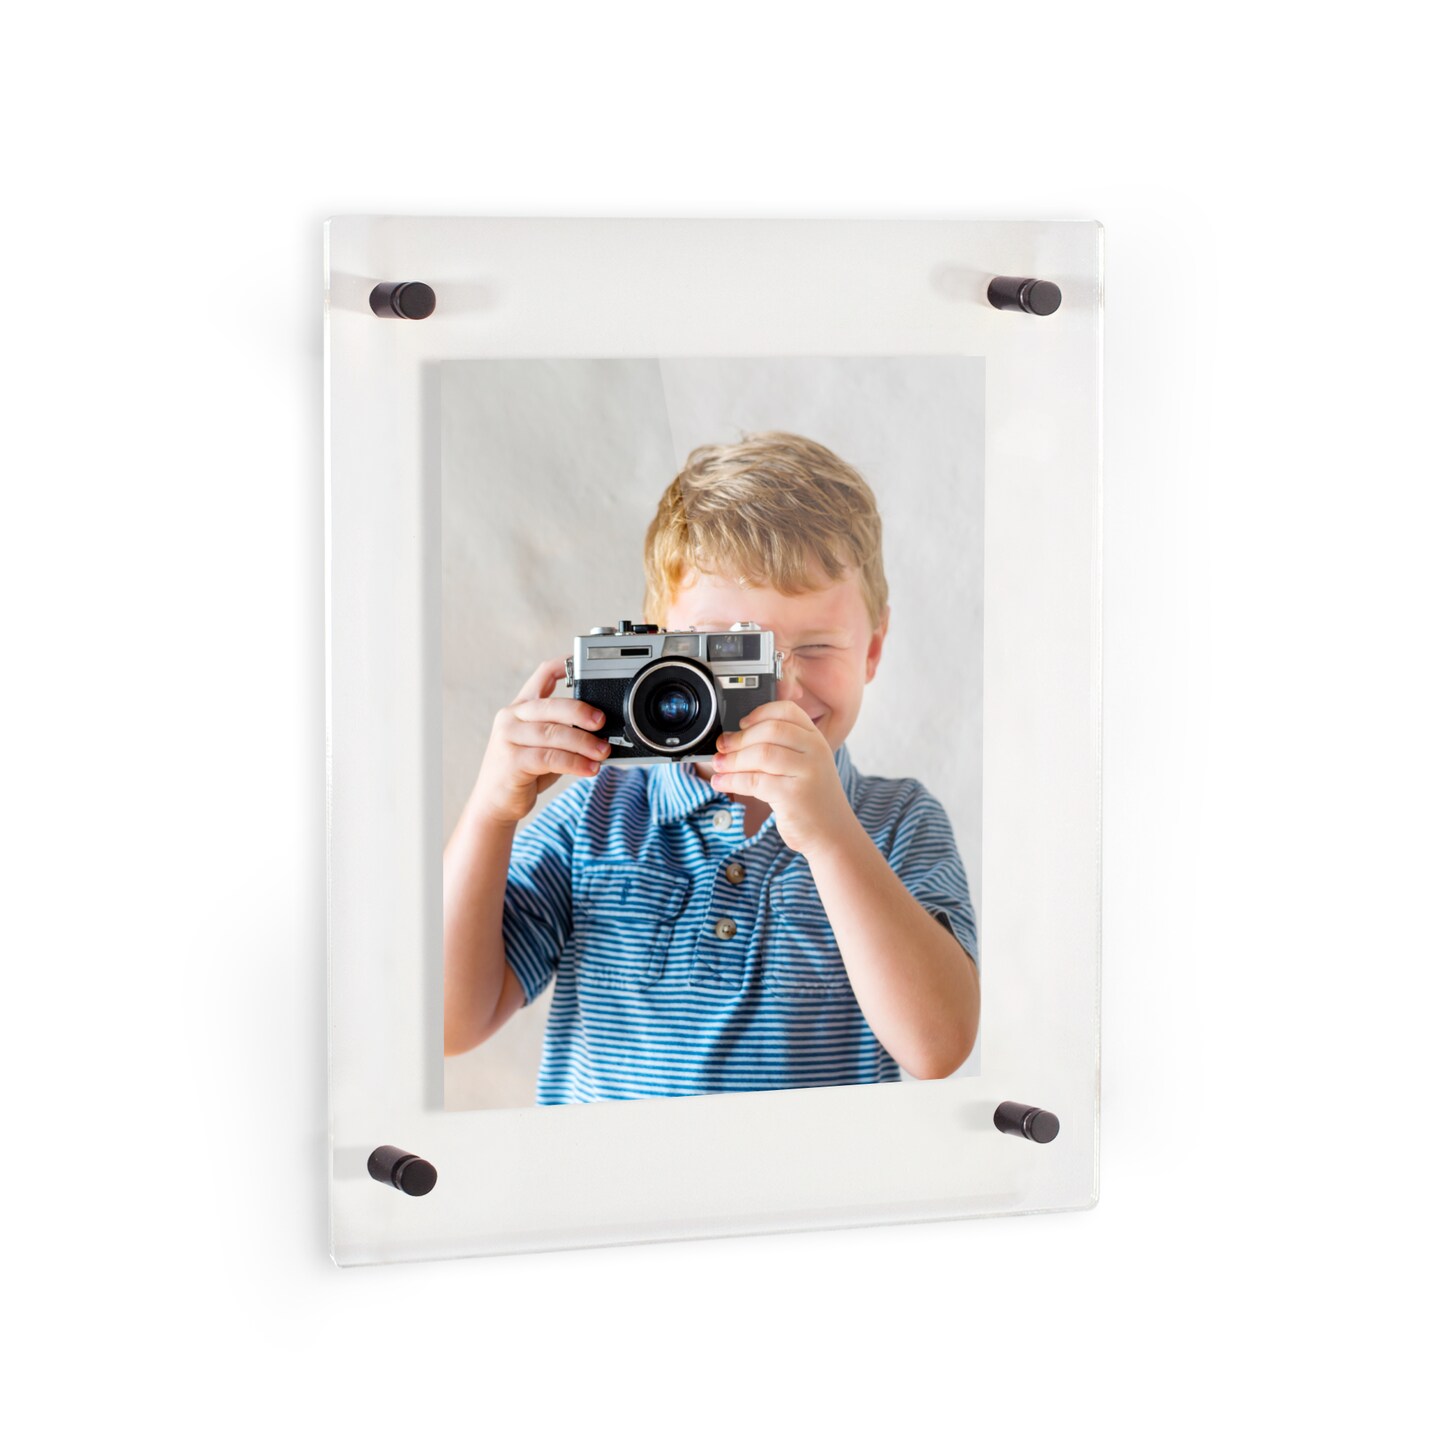 ArtToFrames 16x20 inches Floating Acrylic Frame (Full Frame is 20x24 ...